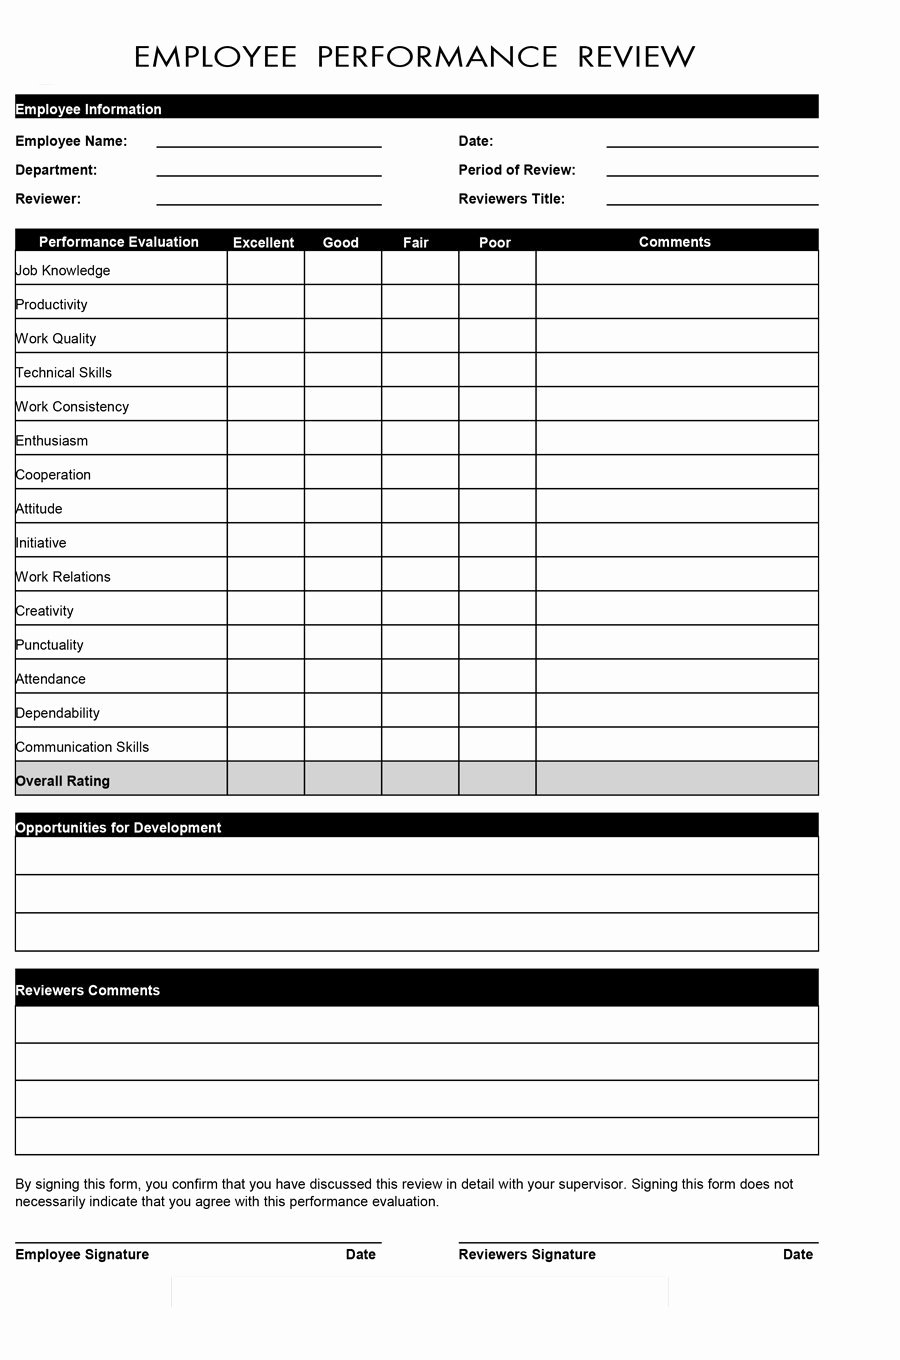 Employee Performance Appraisal form Template New 46 Employee Evaluation forms &amp; Performance Review Examples